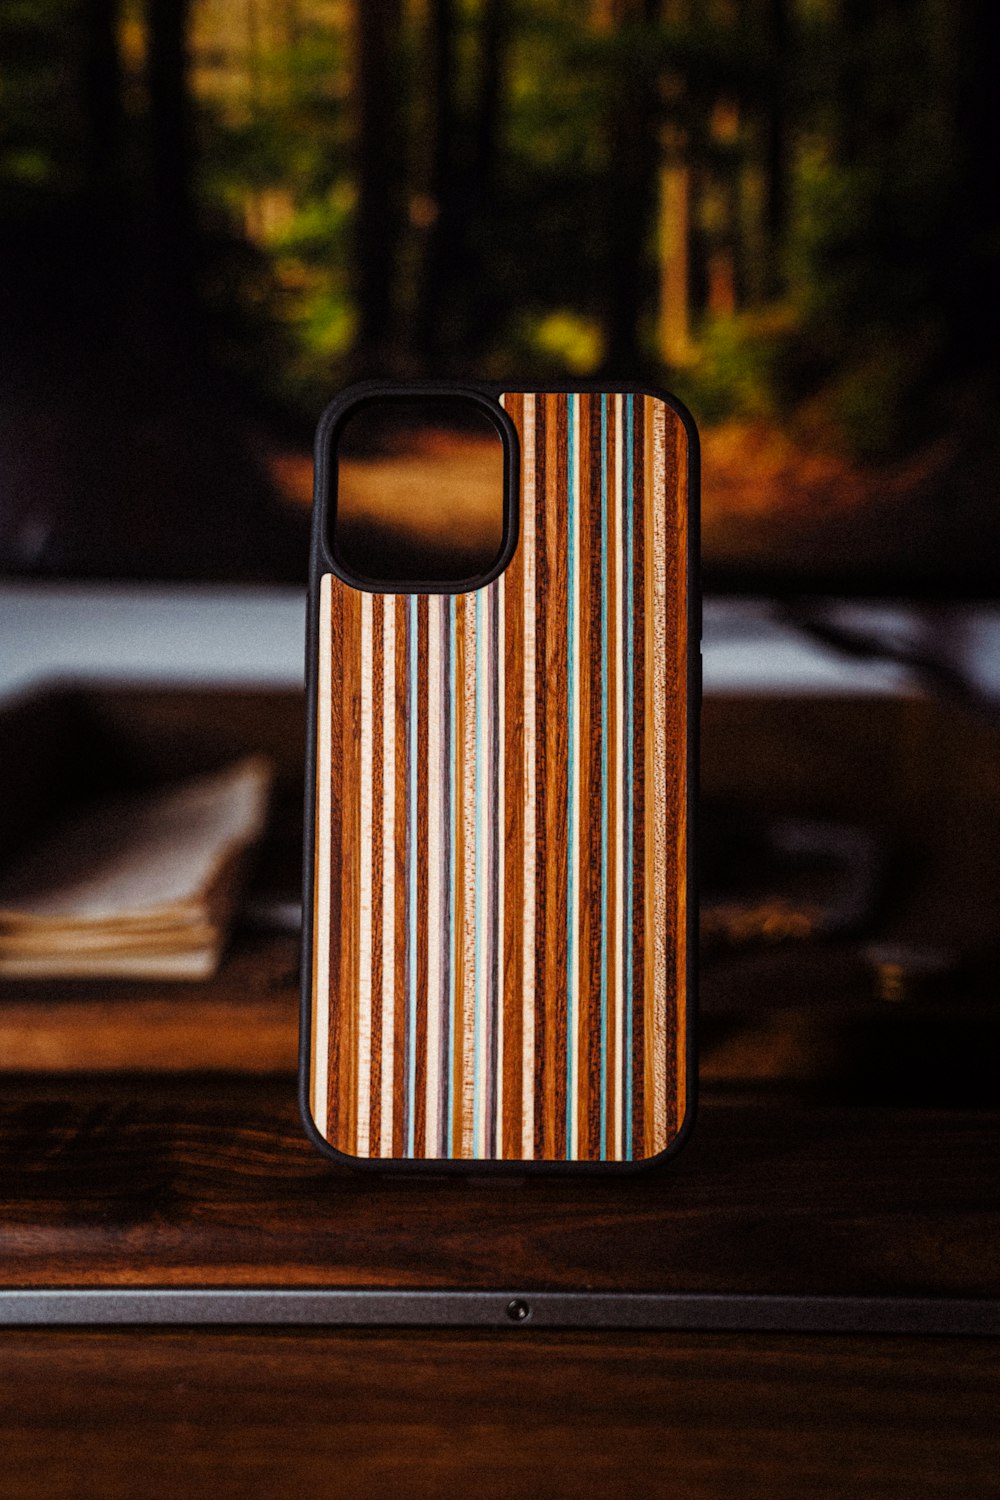 brown and white striped iphone case